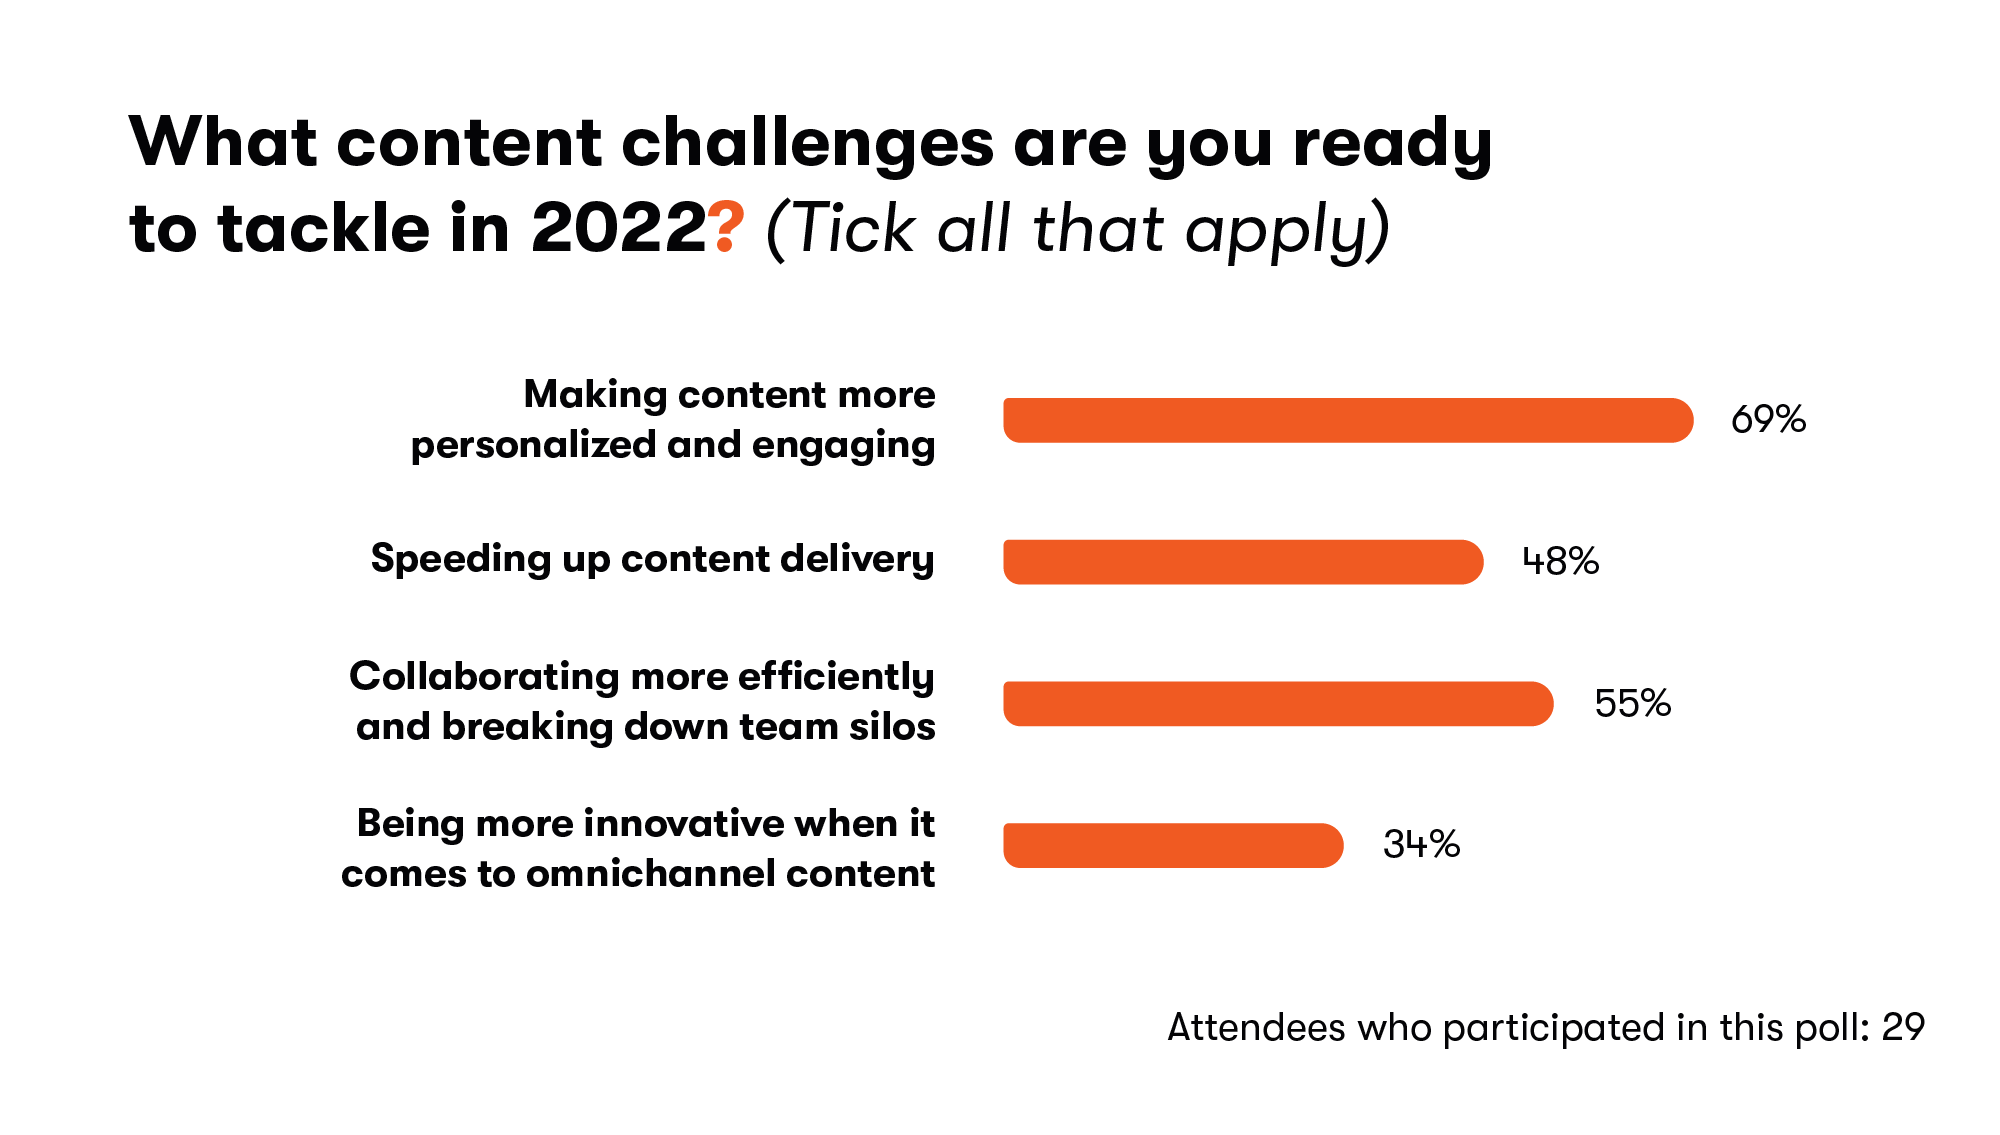 What content challenges are you ready to tackle in 2022?